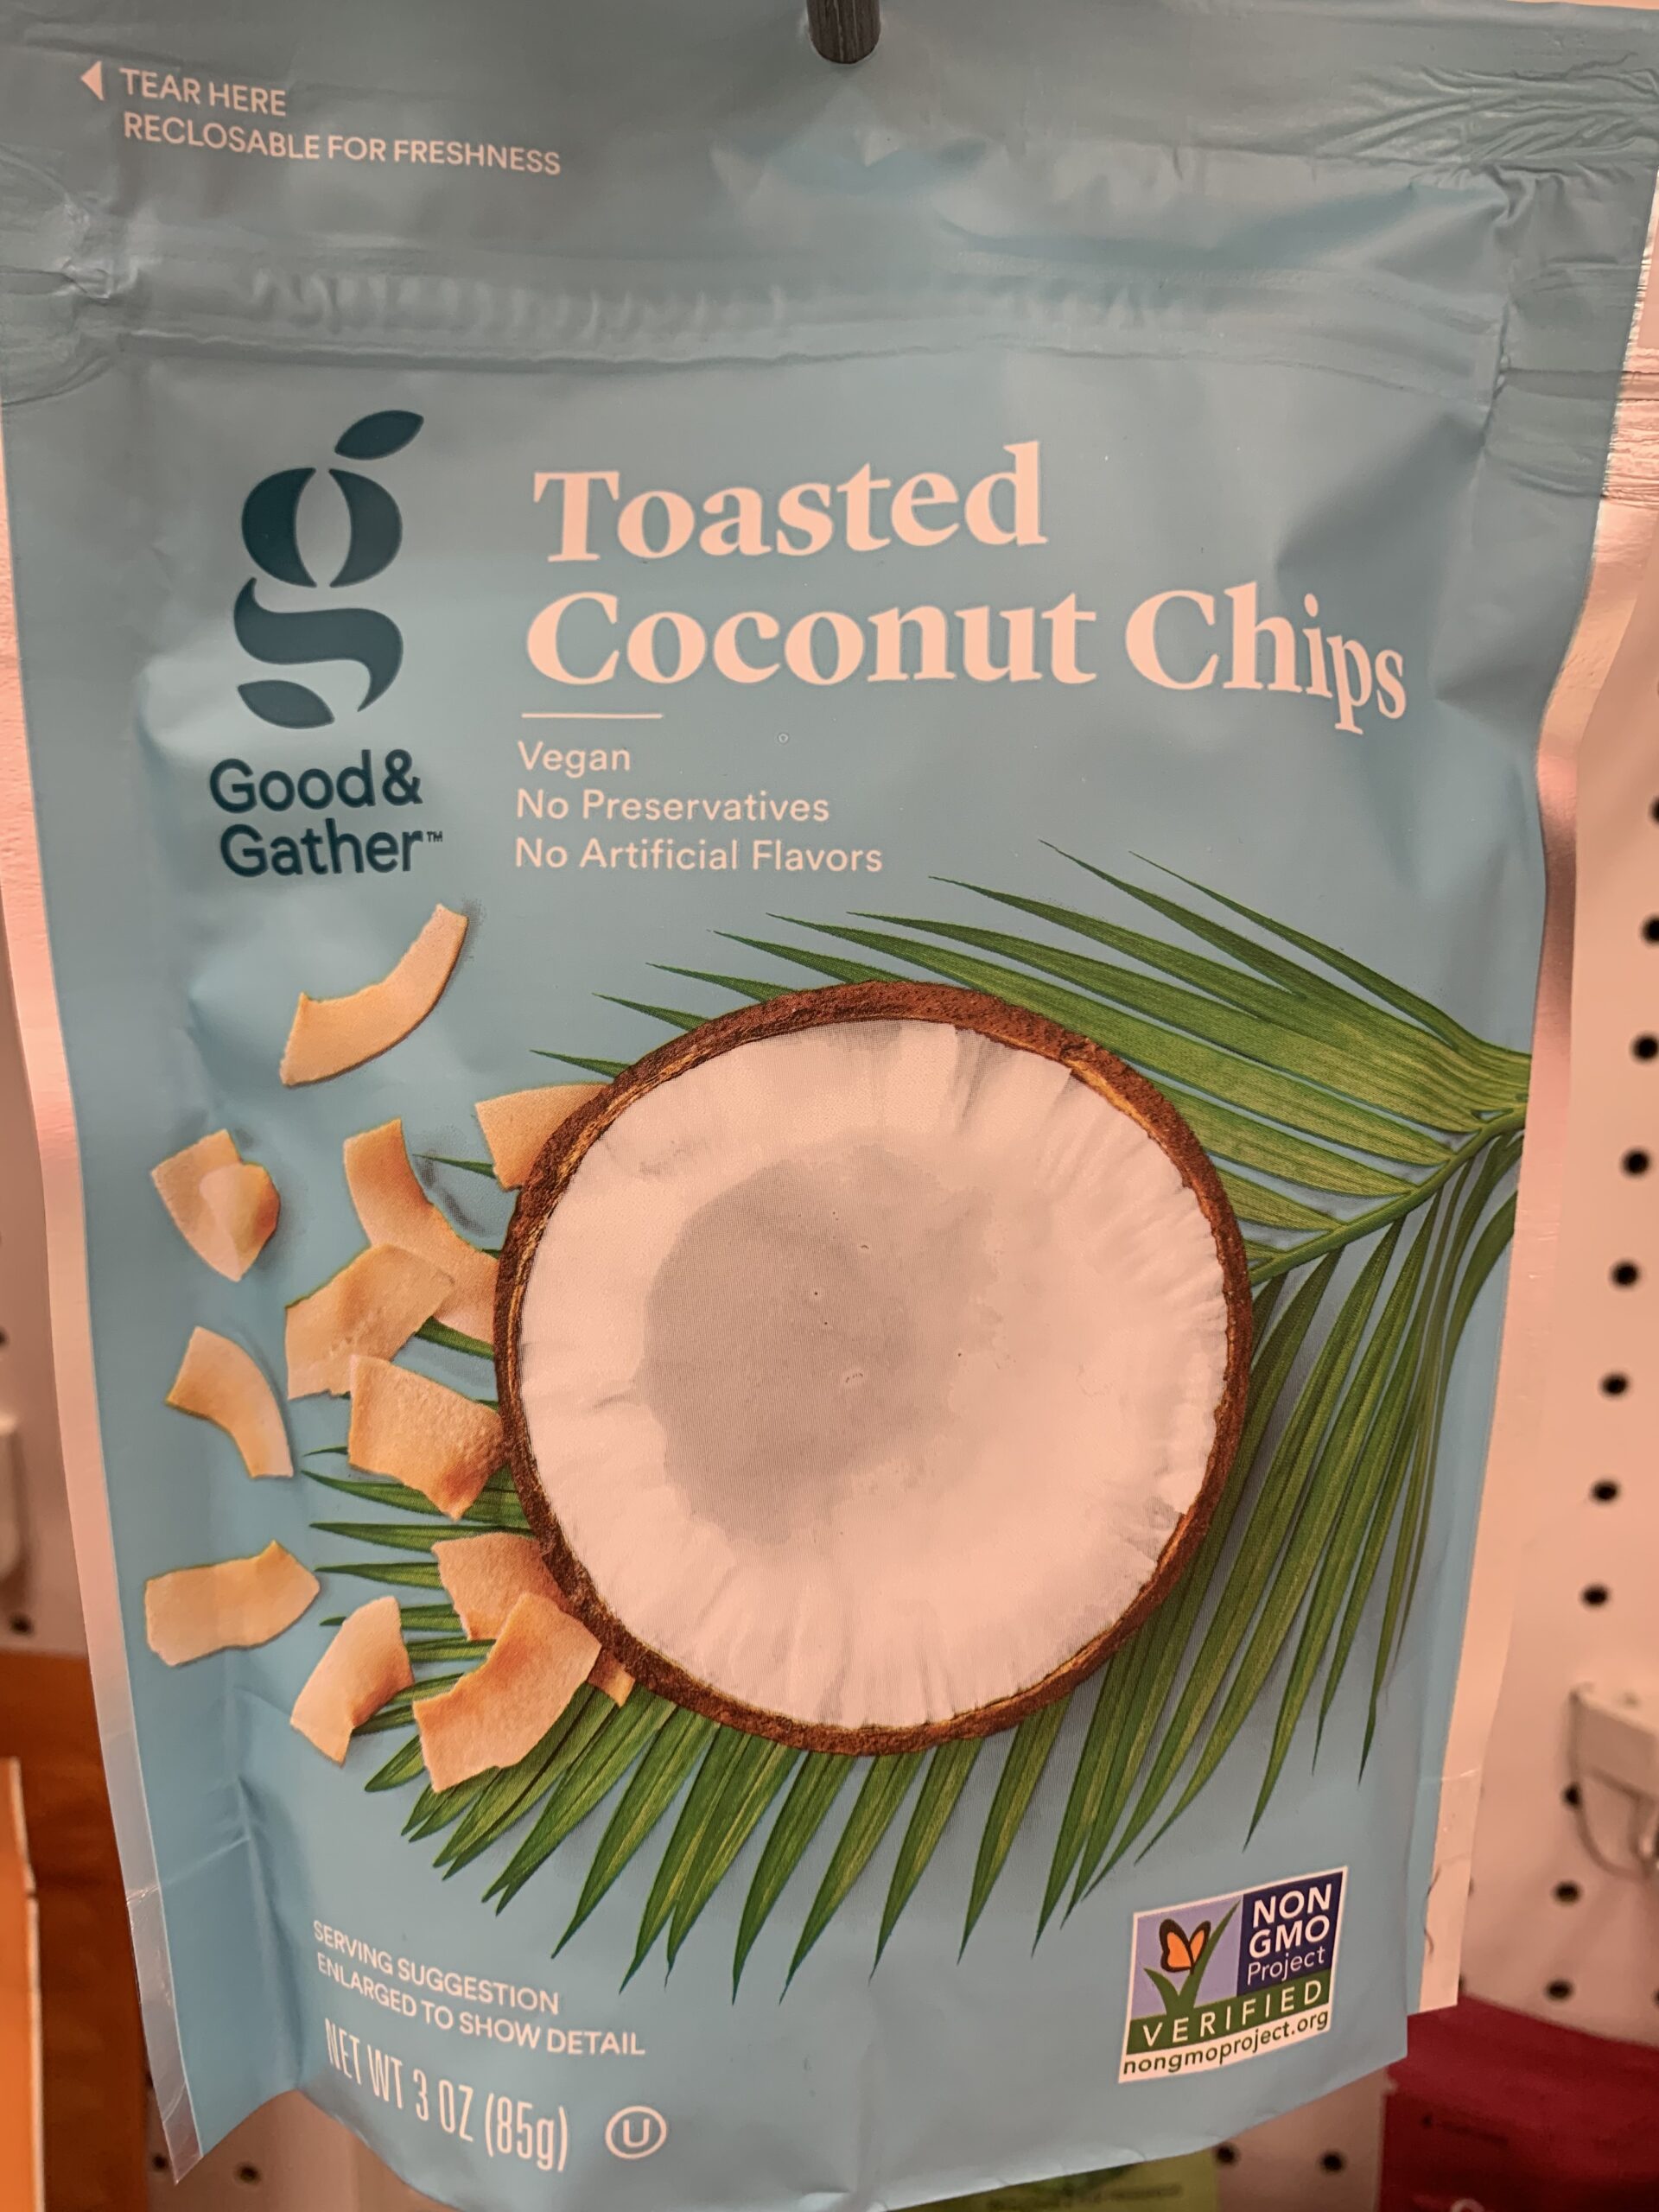 Good & Gather Coconut Chips